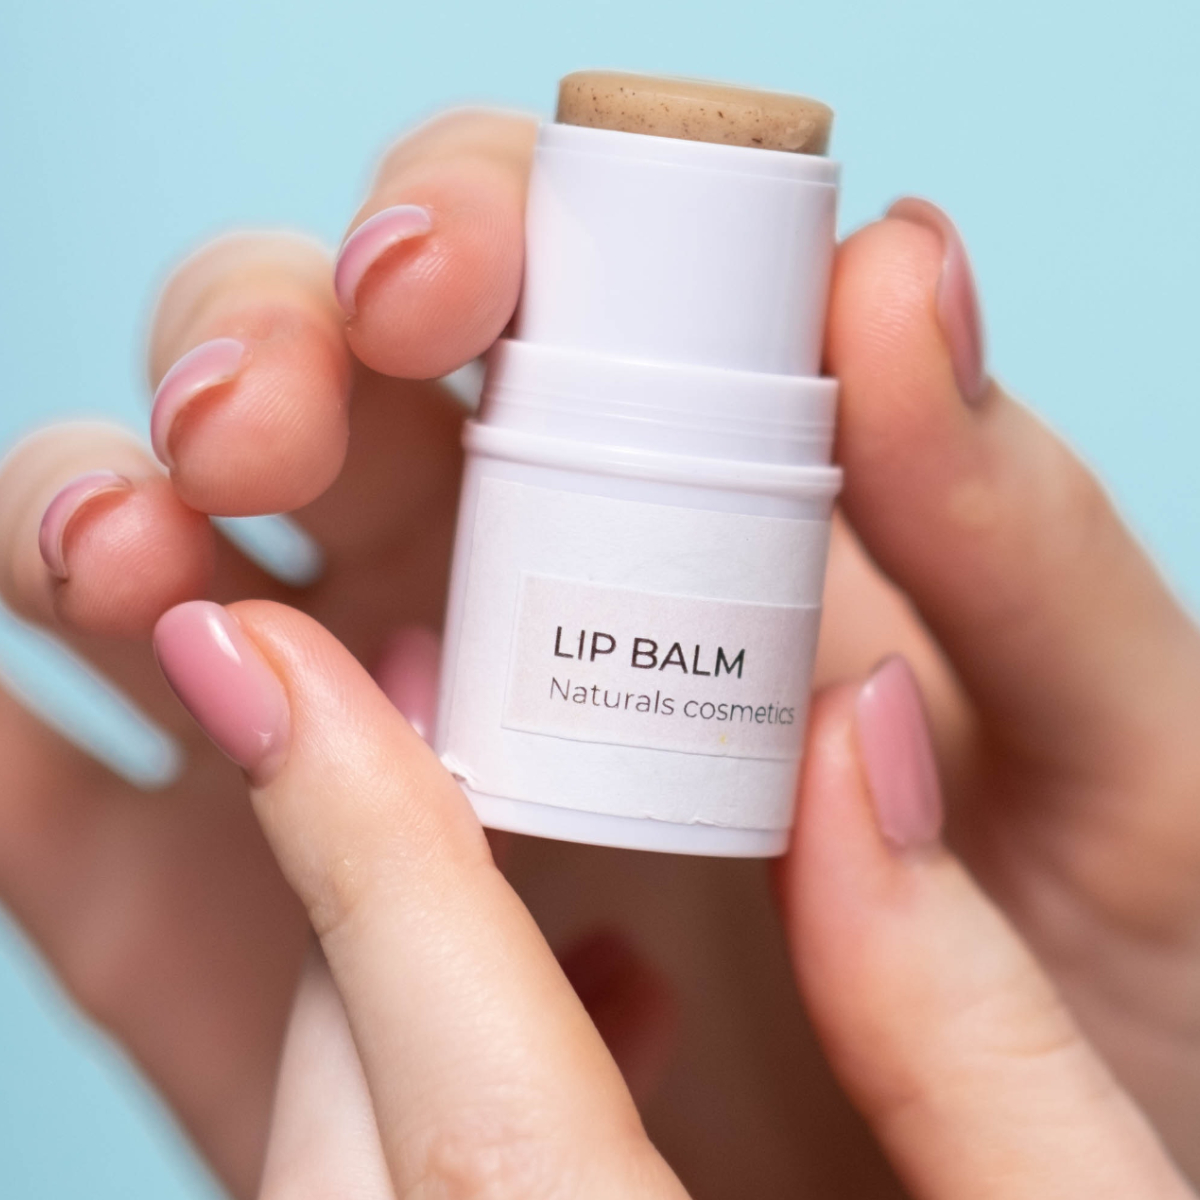 Best lip balm in India: Get your hands on THESE lip balms for dark and hyperpigmented lips